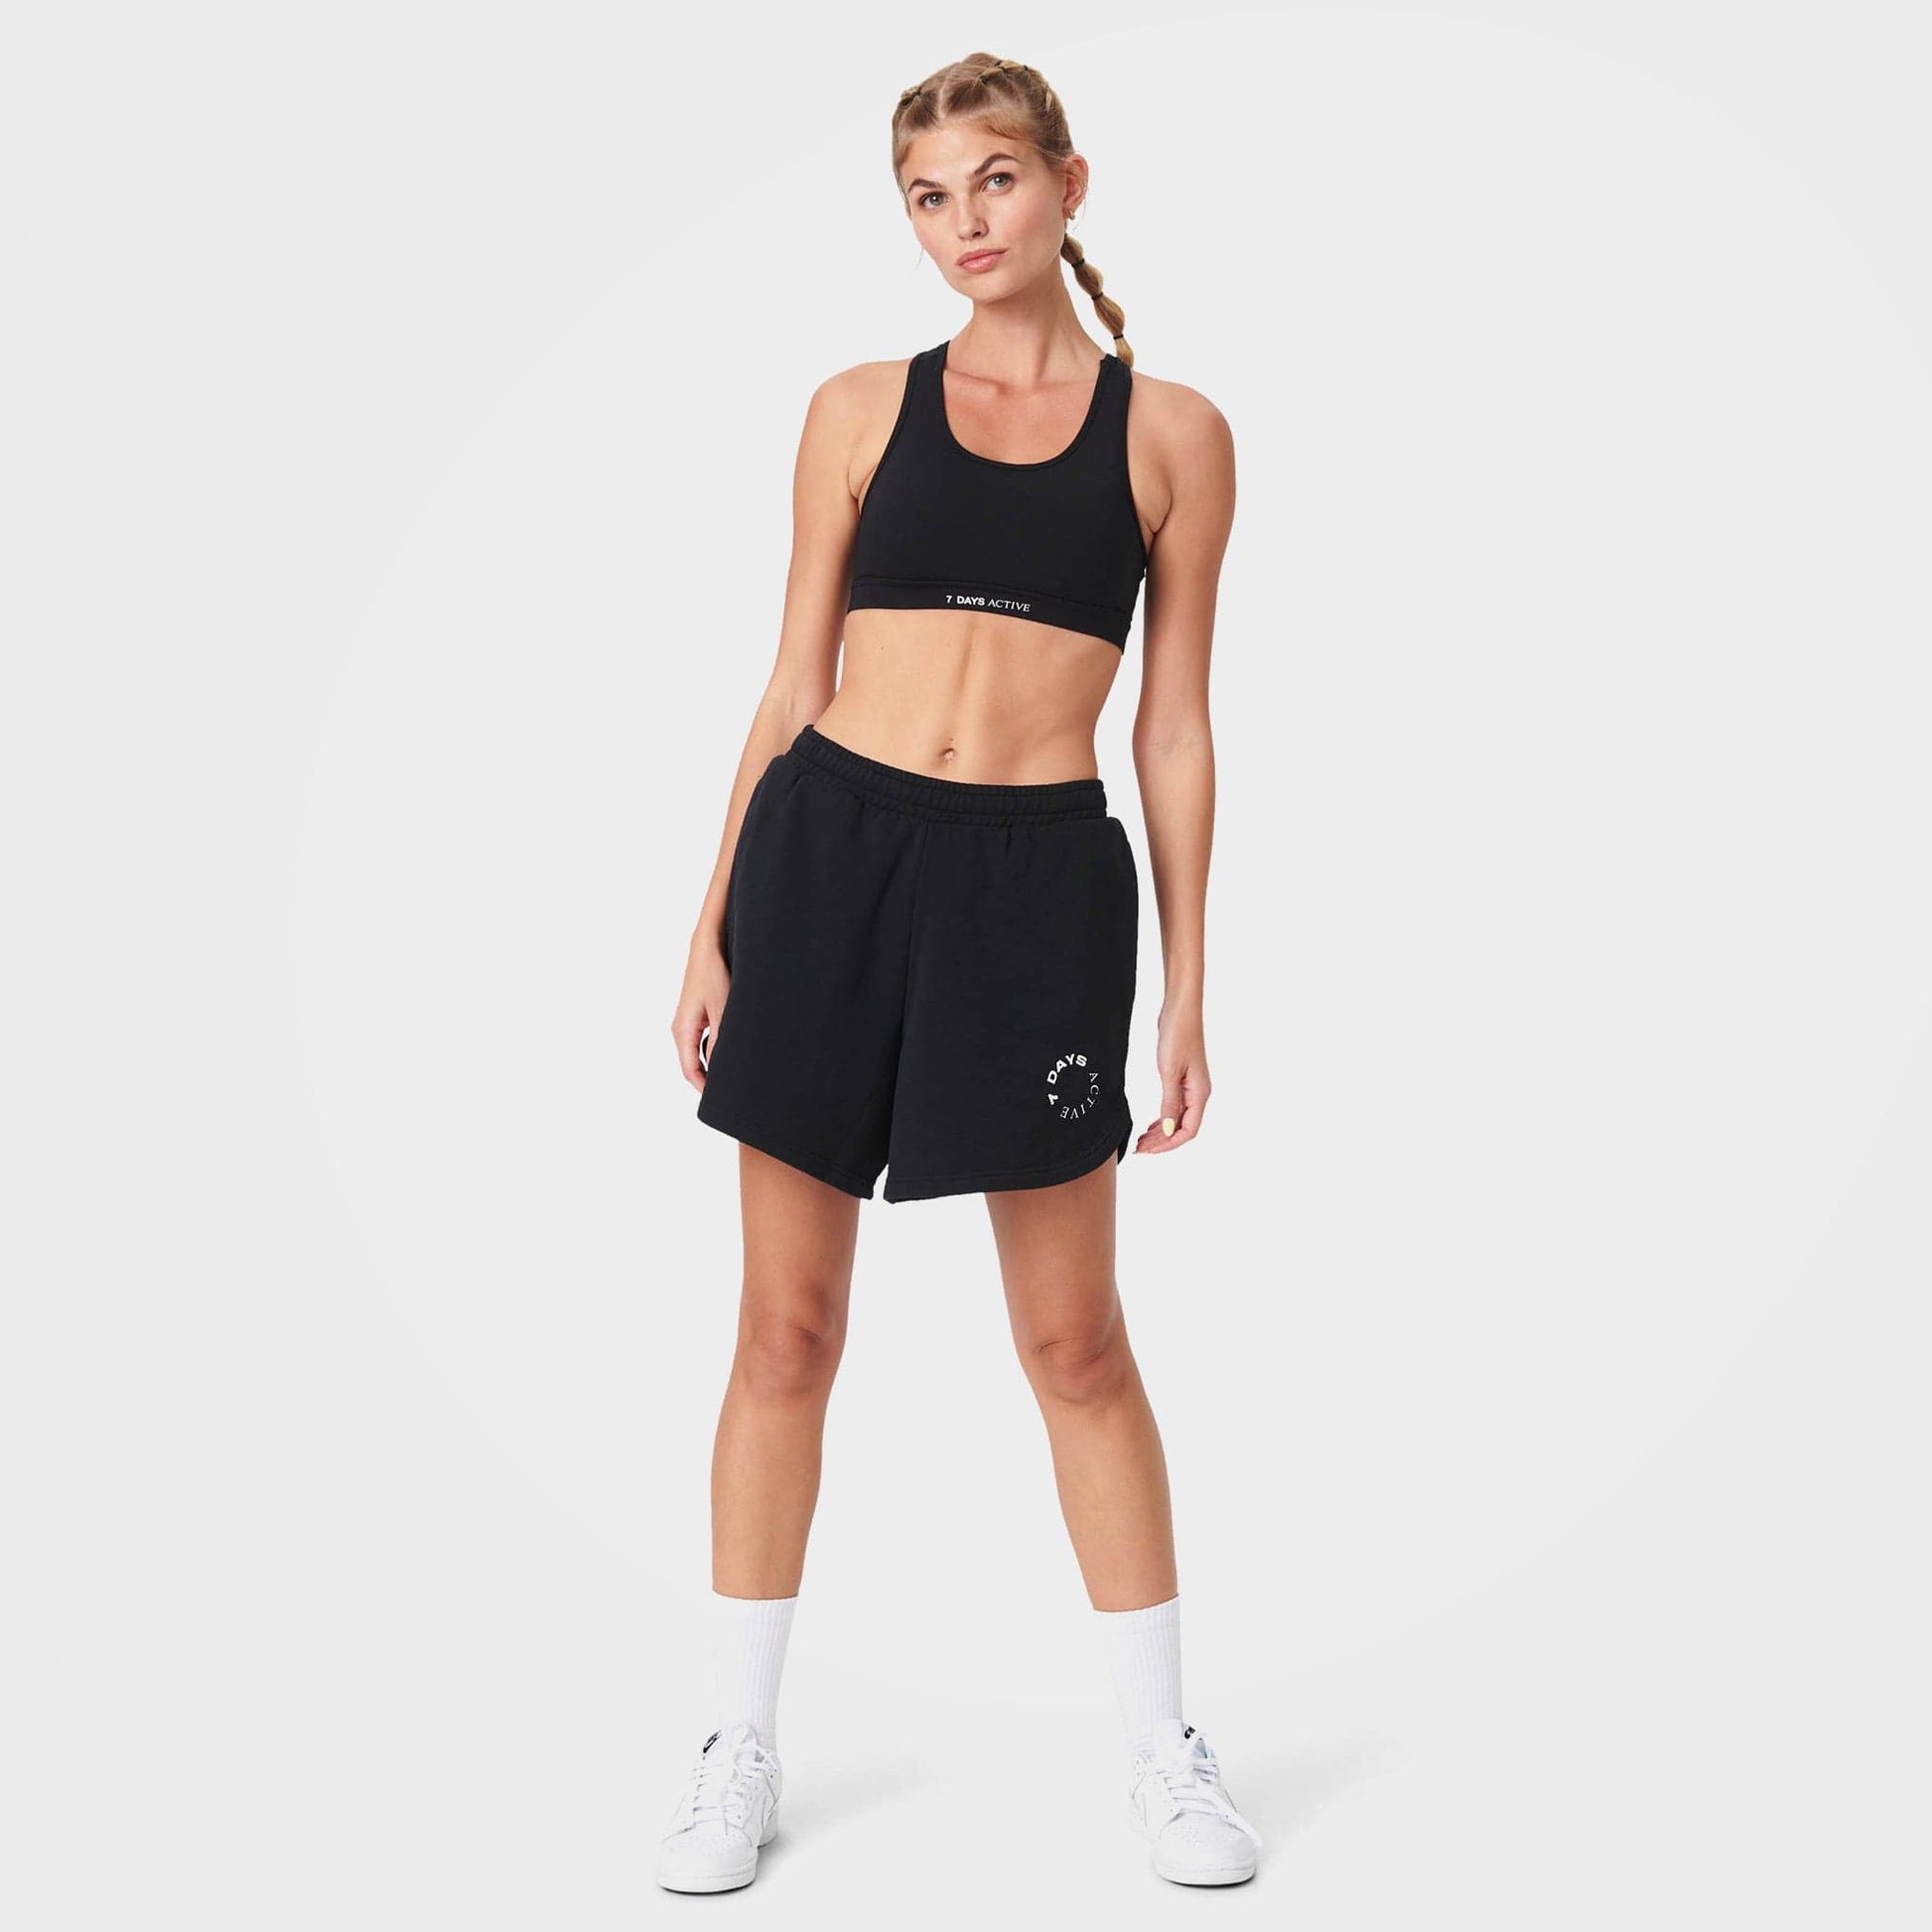 Black Organic Cotton Sweat Shorts by 7Days Active